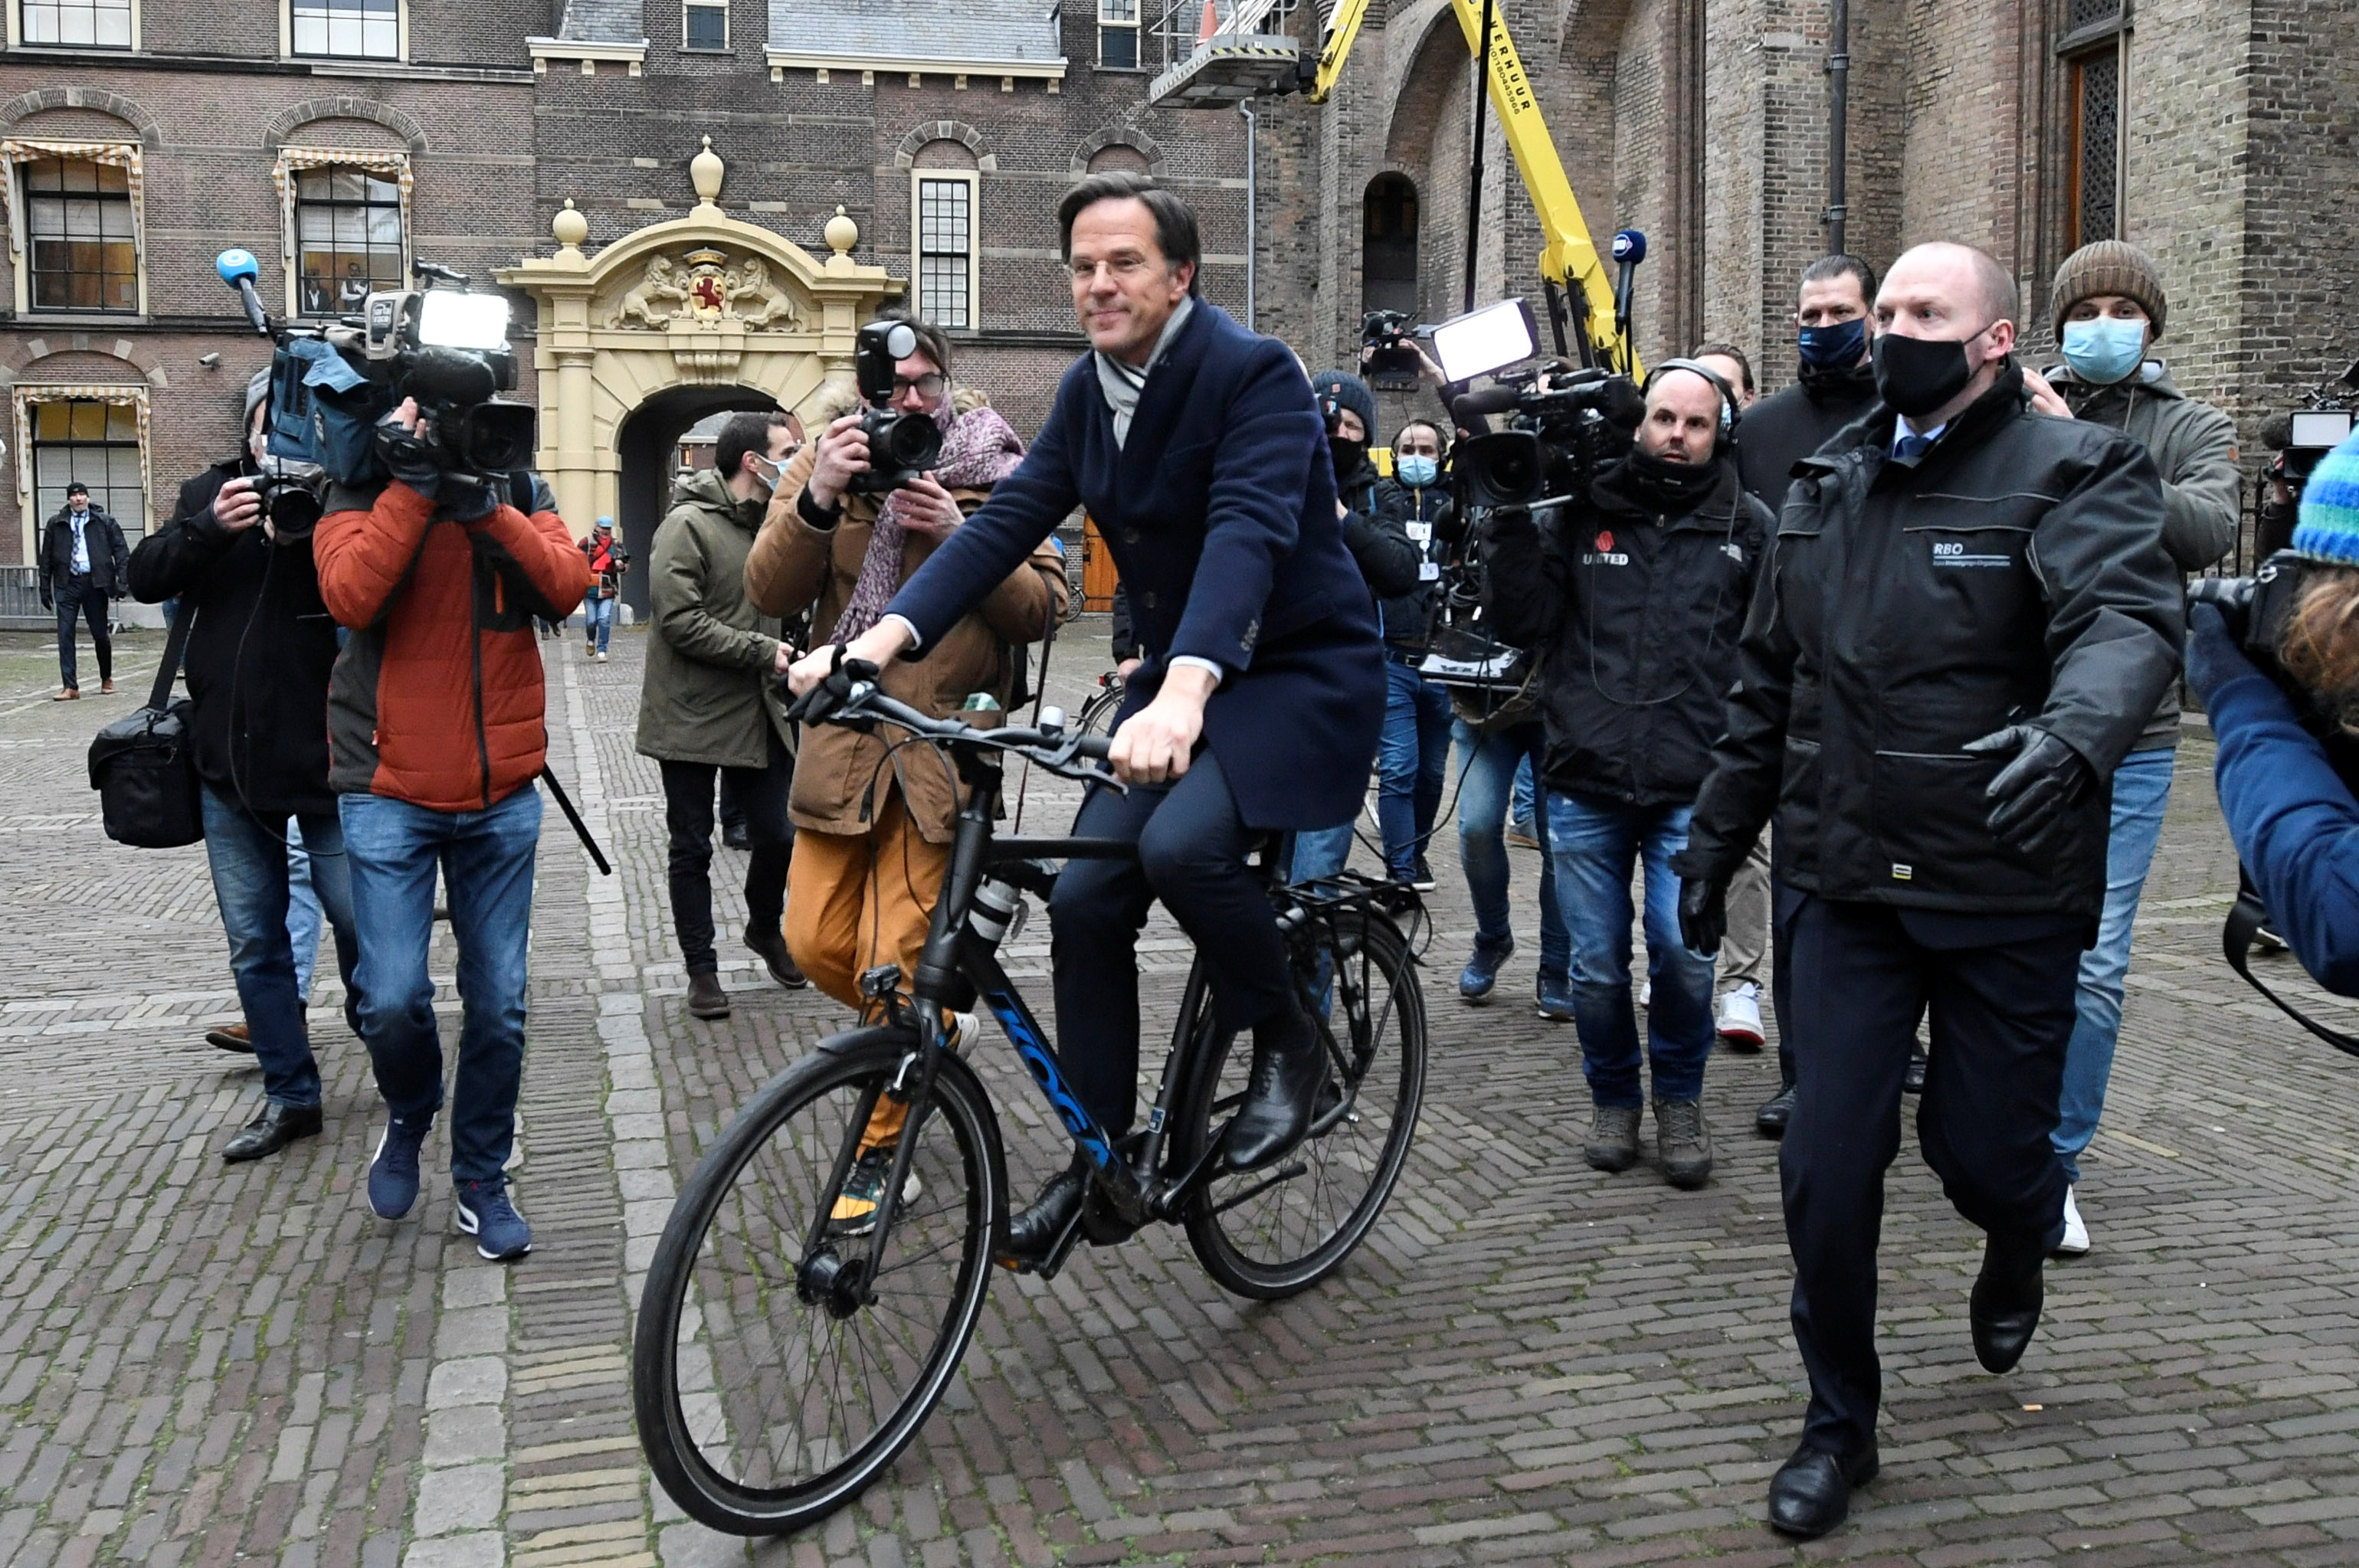 Dutch Prime Minister Mark Rutte leaves after a meeting in The Hague